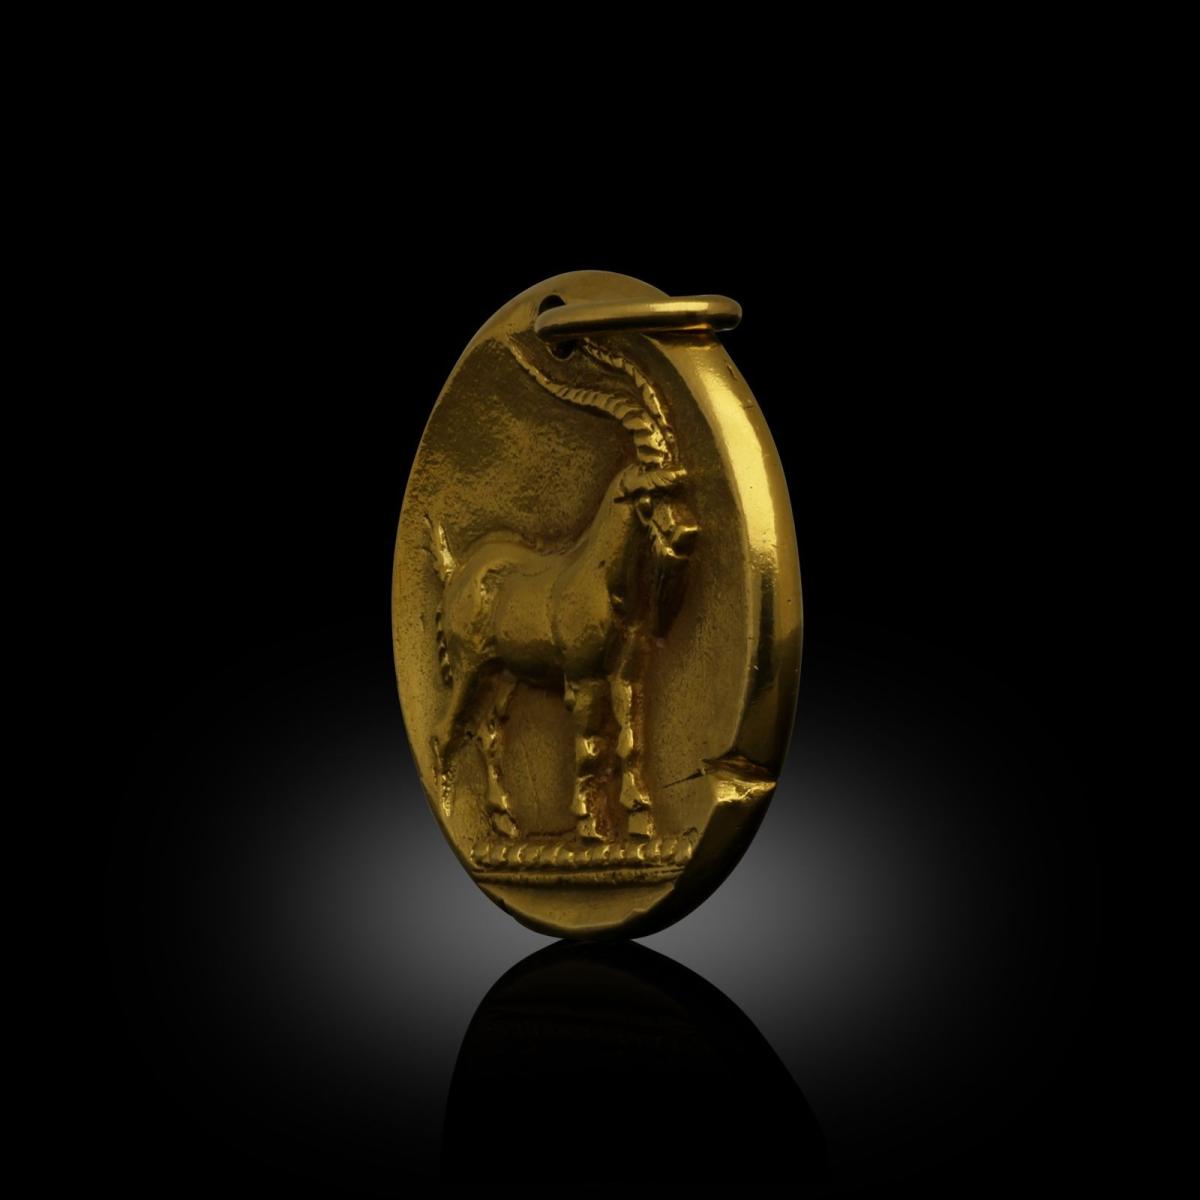 Van Cleef & Arpels Iconic 18ct Gold Capricorn Pendant From The Zodiac Collection